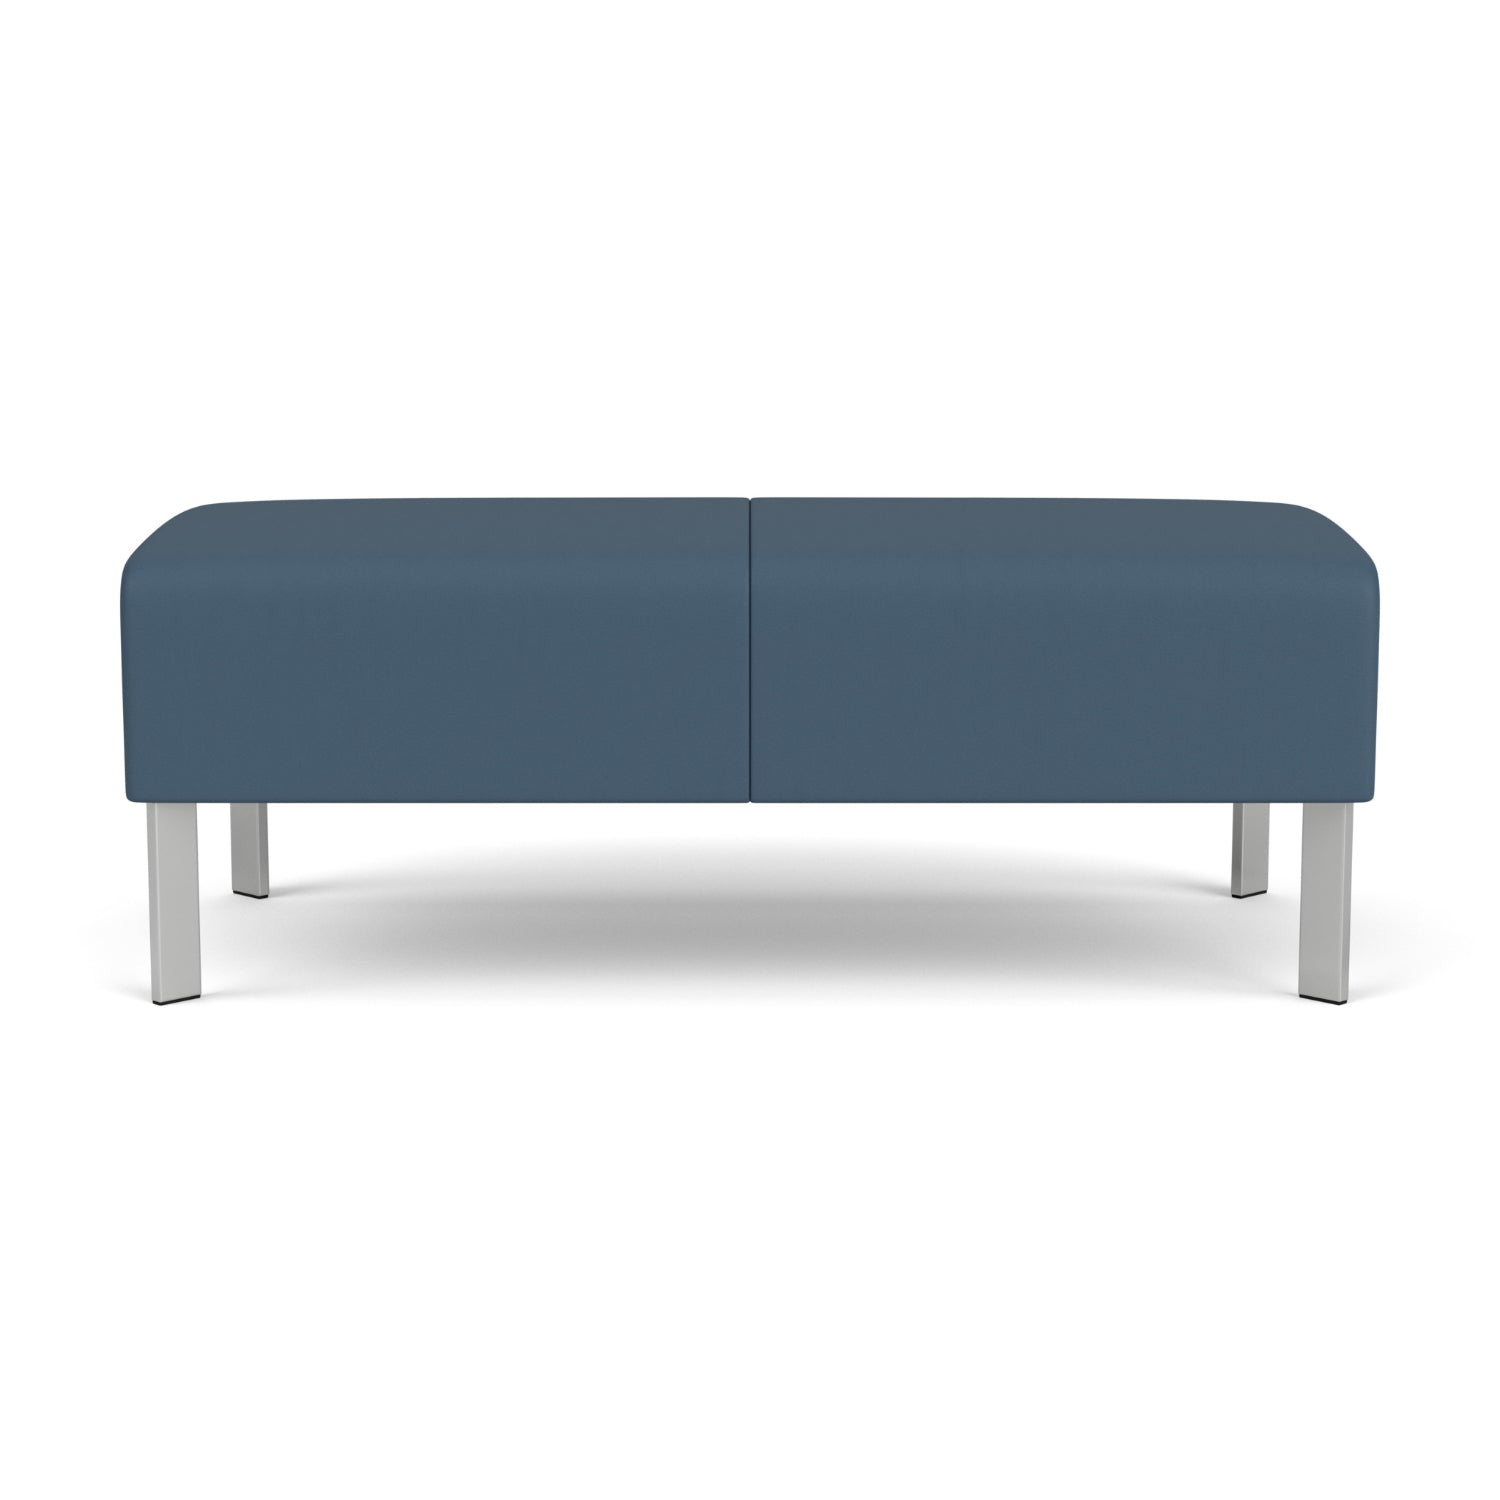 Luxe Collection Reception Seating, 2 Seat Bench, Standard Vinyl Upholstery, FREE SHIPPING